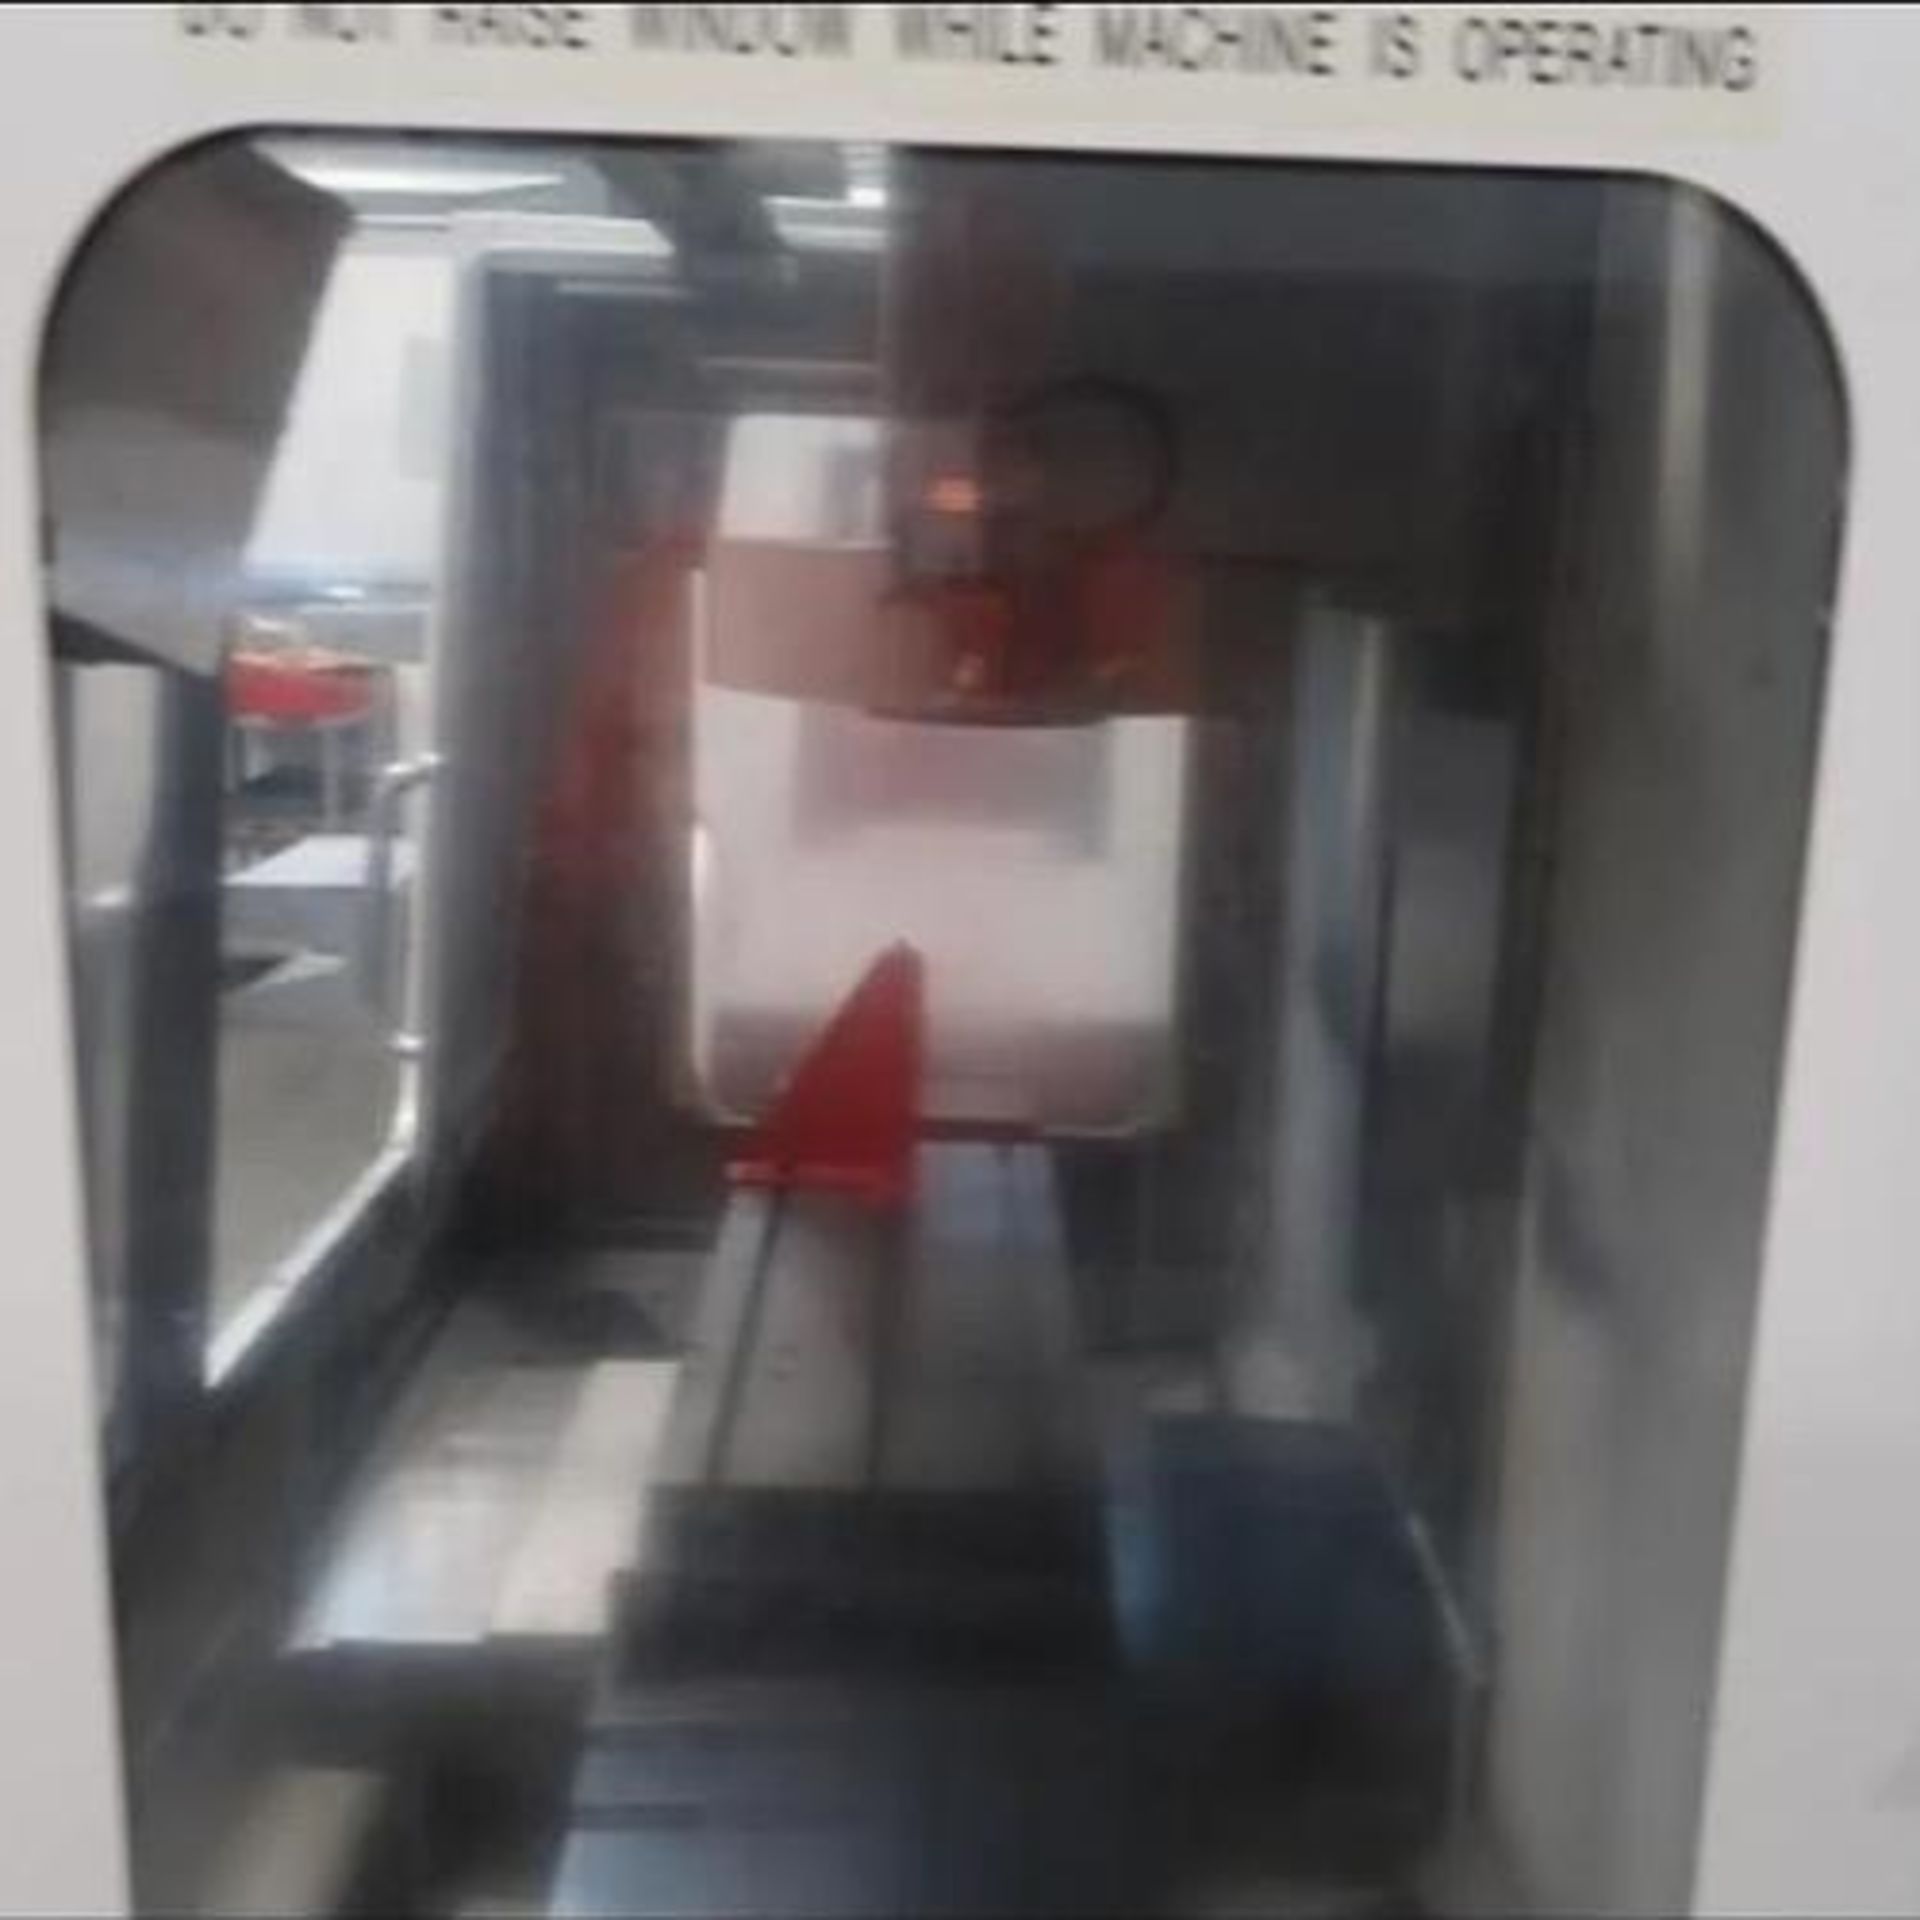 2007 HAAS VF-2 CNC Vertical Machining Center - Image 14 of 14